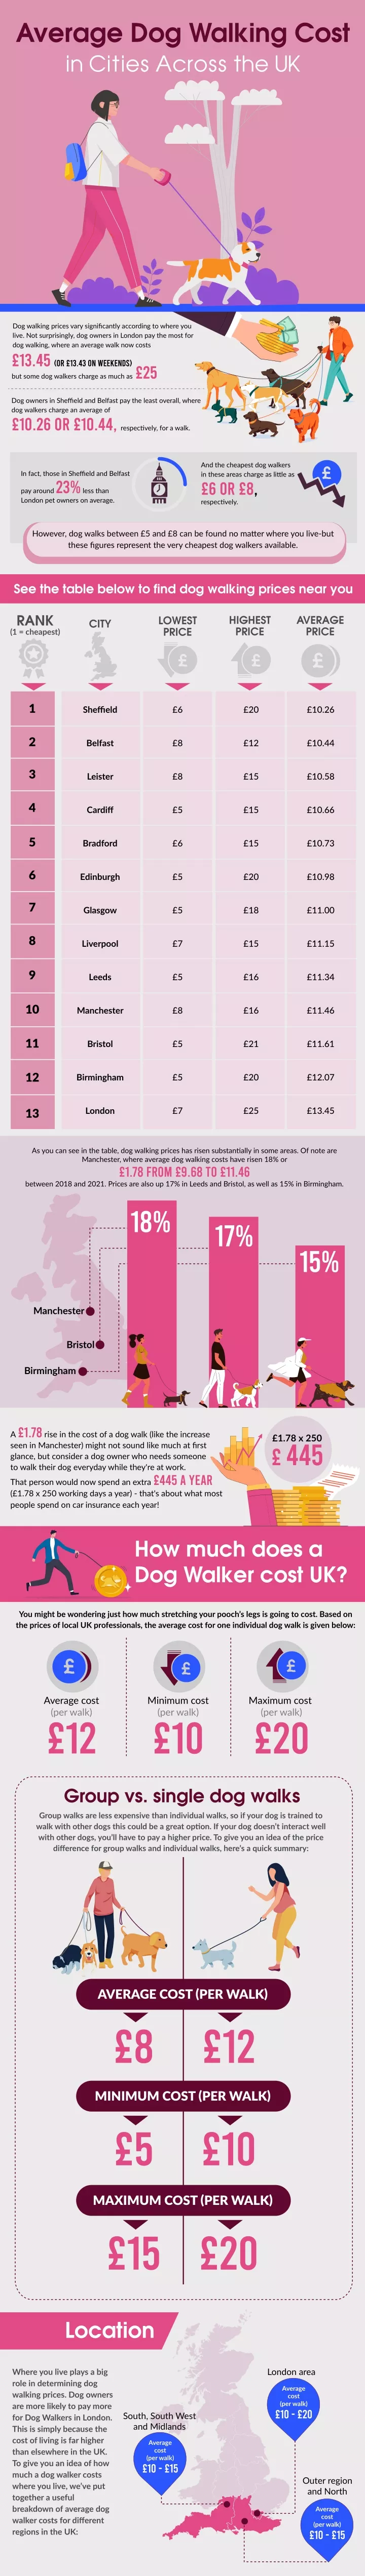 average dog walking cost in cities across the uk